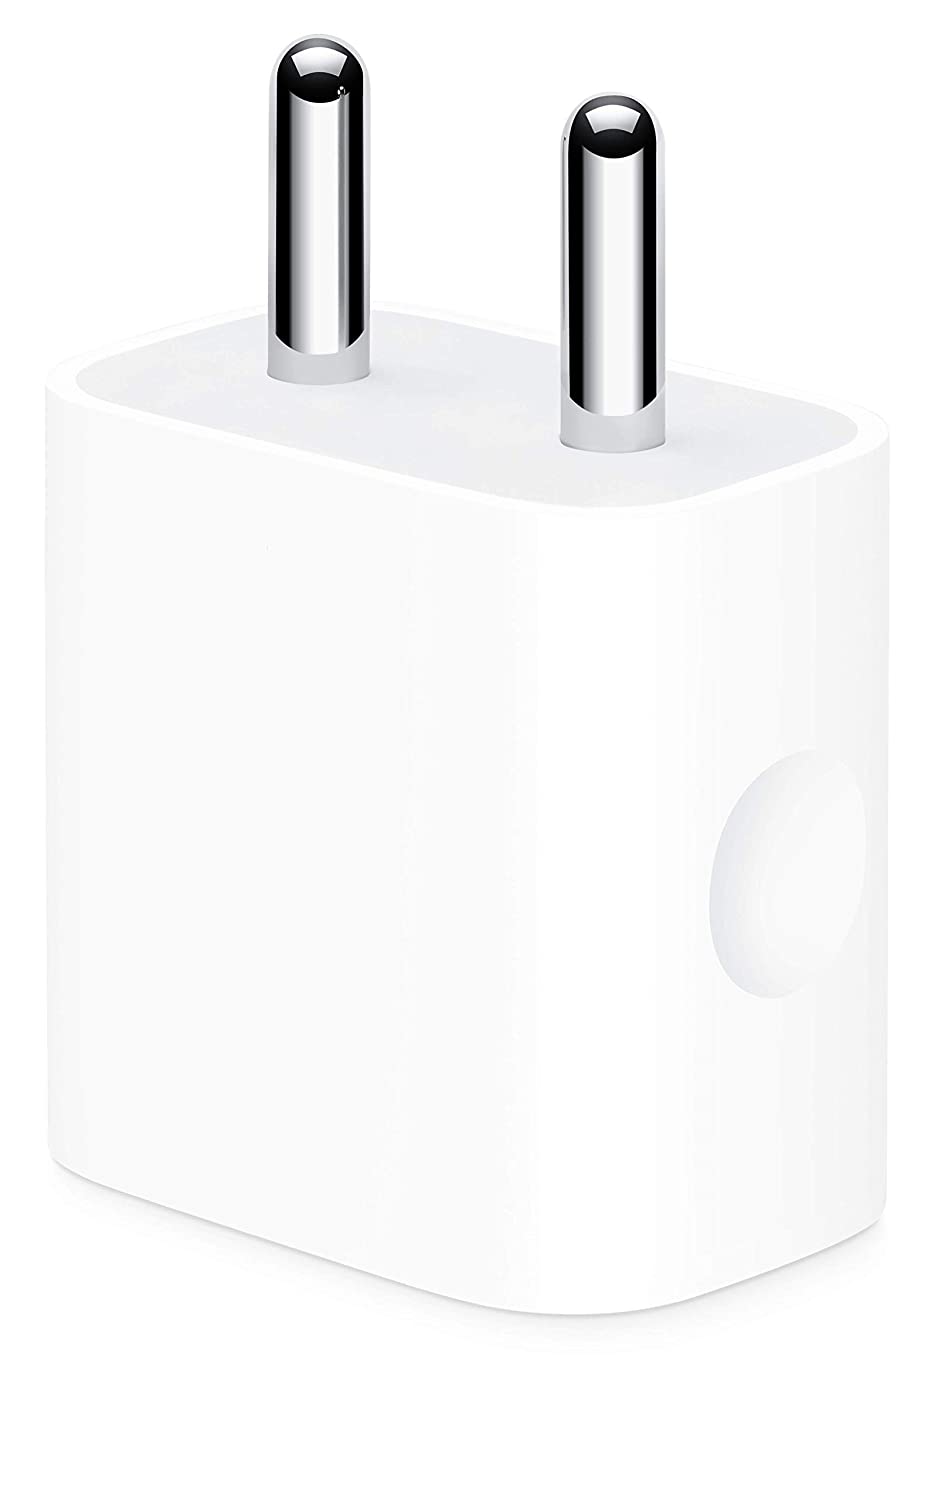 Open Box, Unused Apple 20W USB C Power Adapter  for iPhone iPad & AirPods